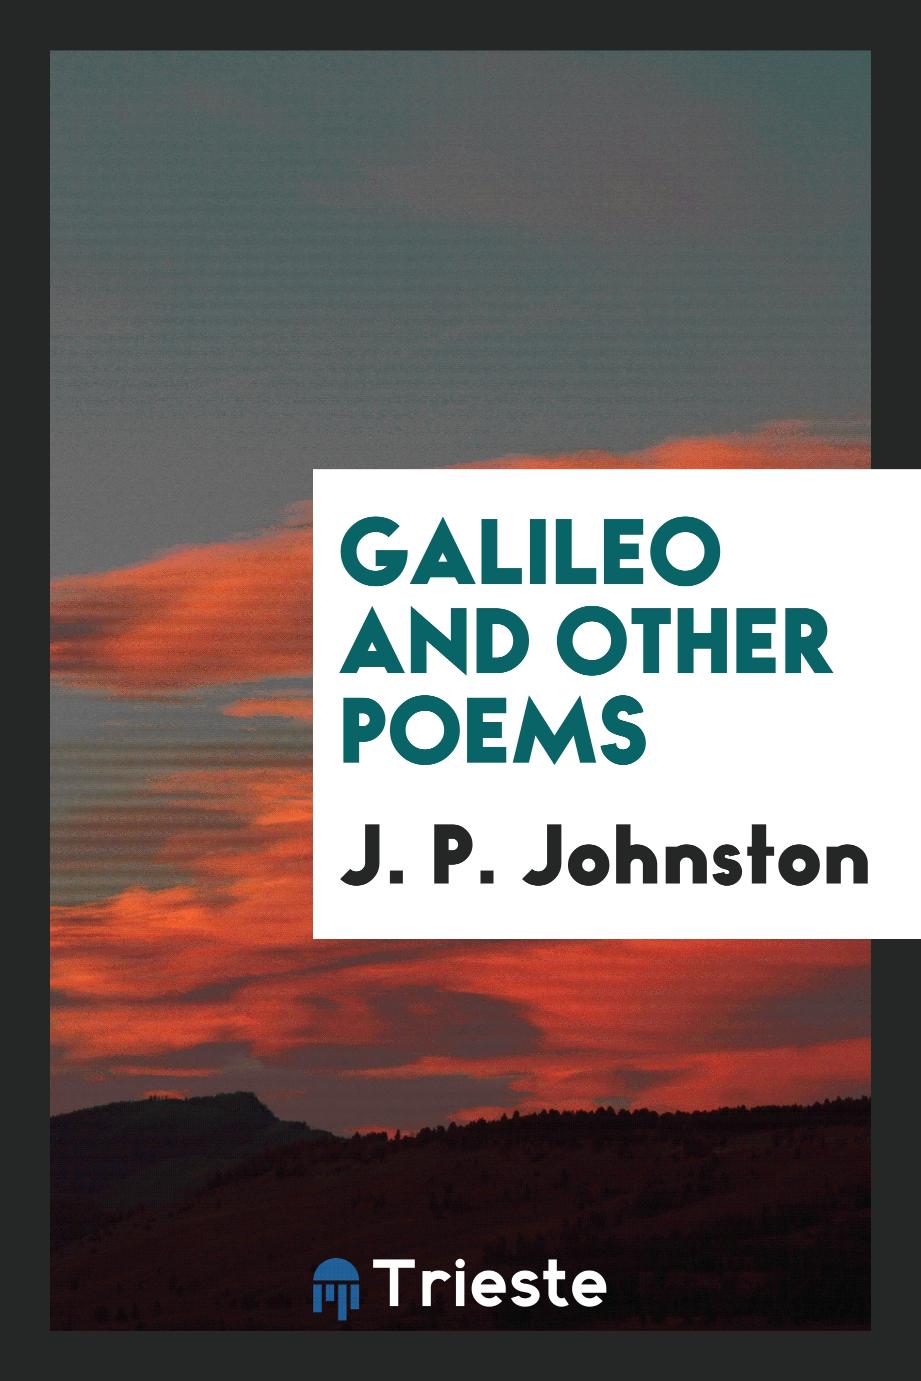 Galileo and other poems